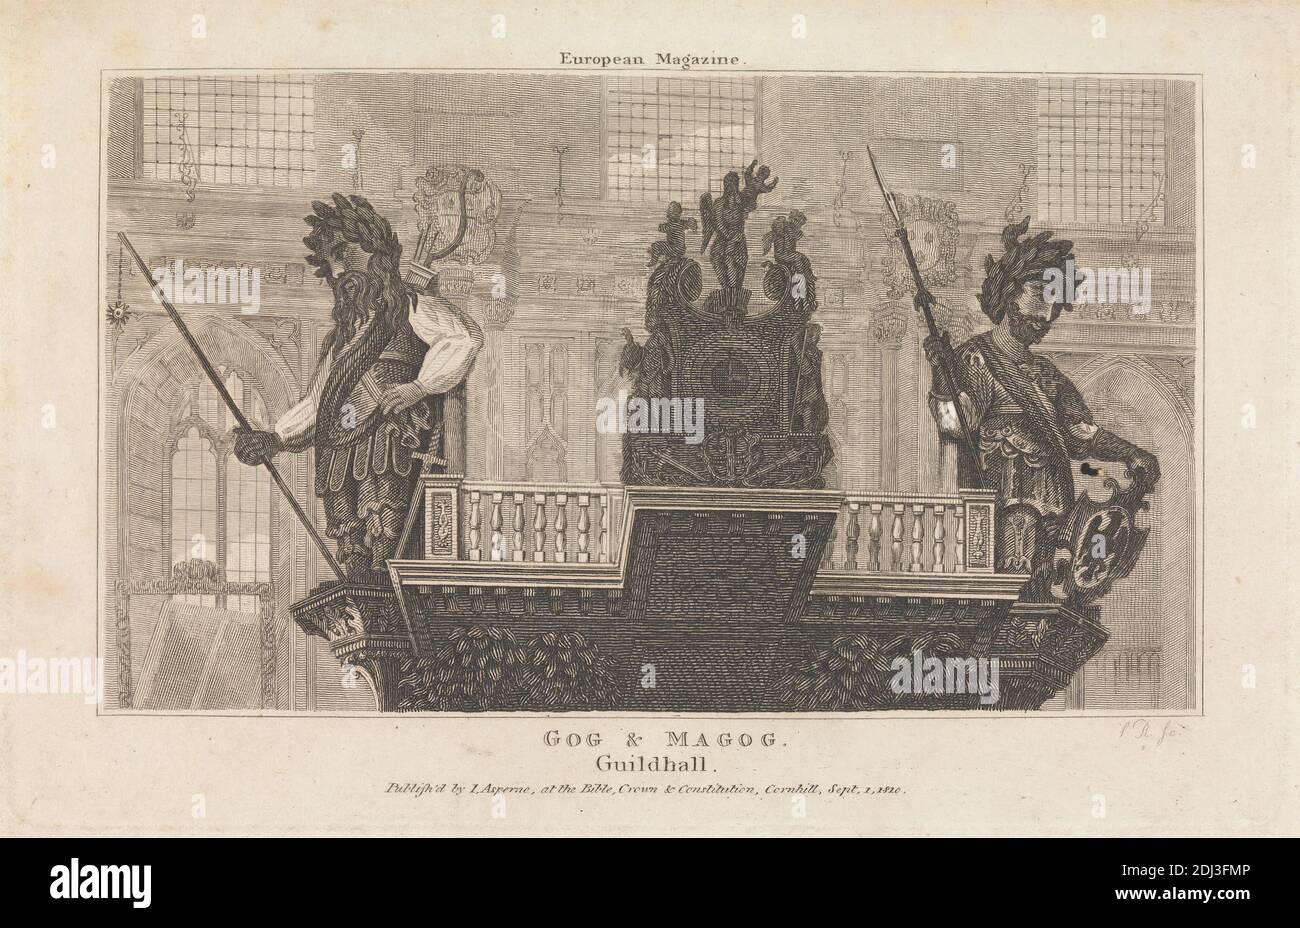 Gog and Magog, Guildhall, after unknown artist, unknown artist, (R. S.), 1820 Stock Photo